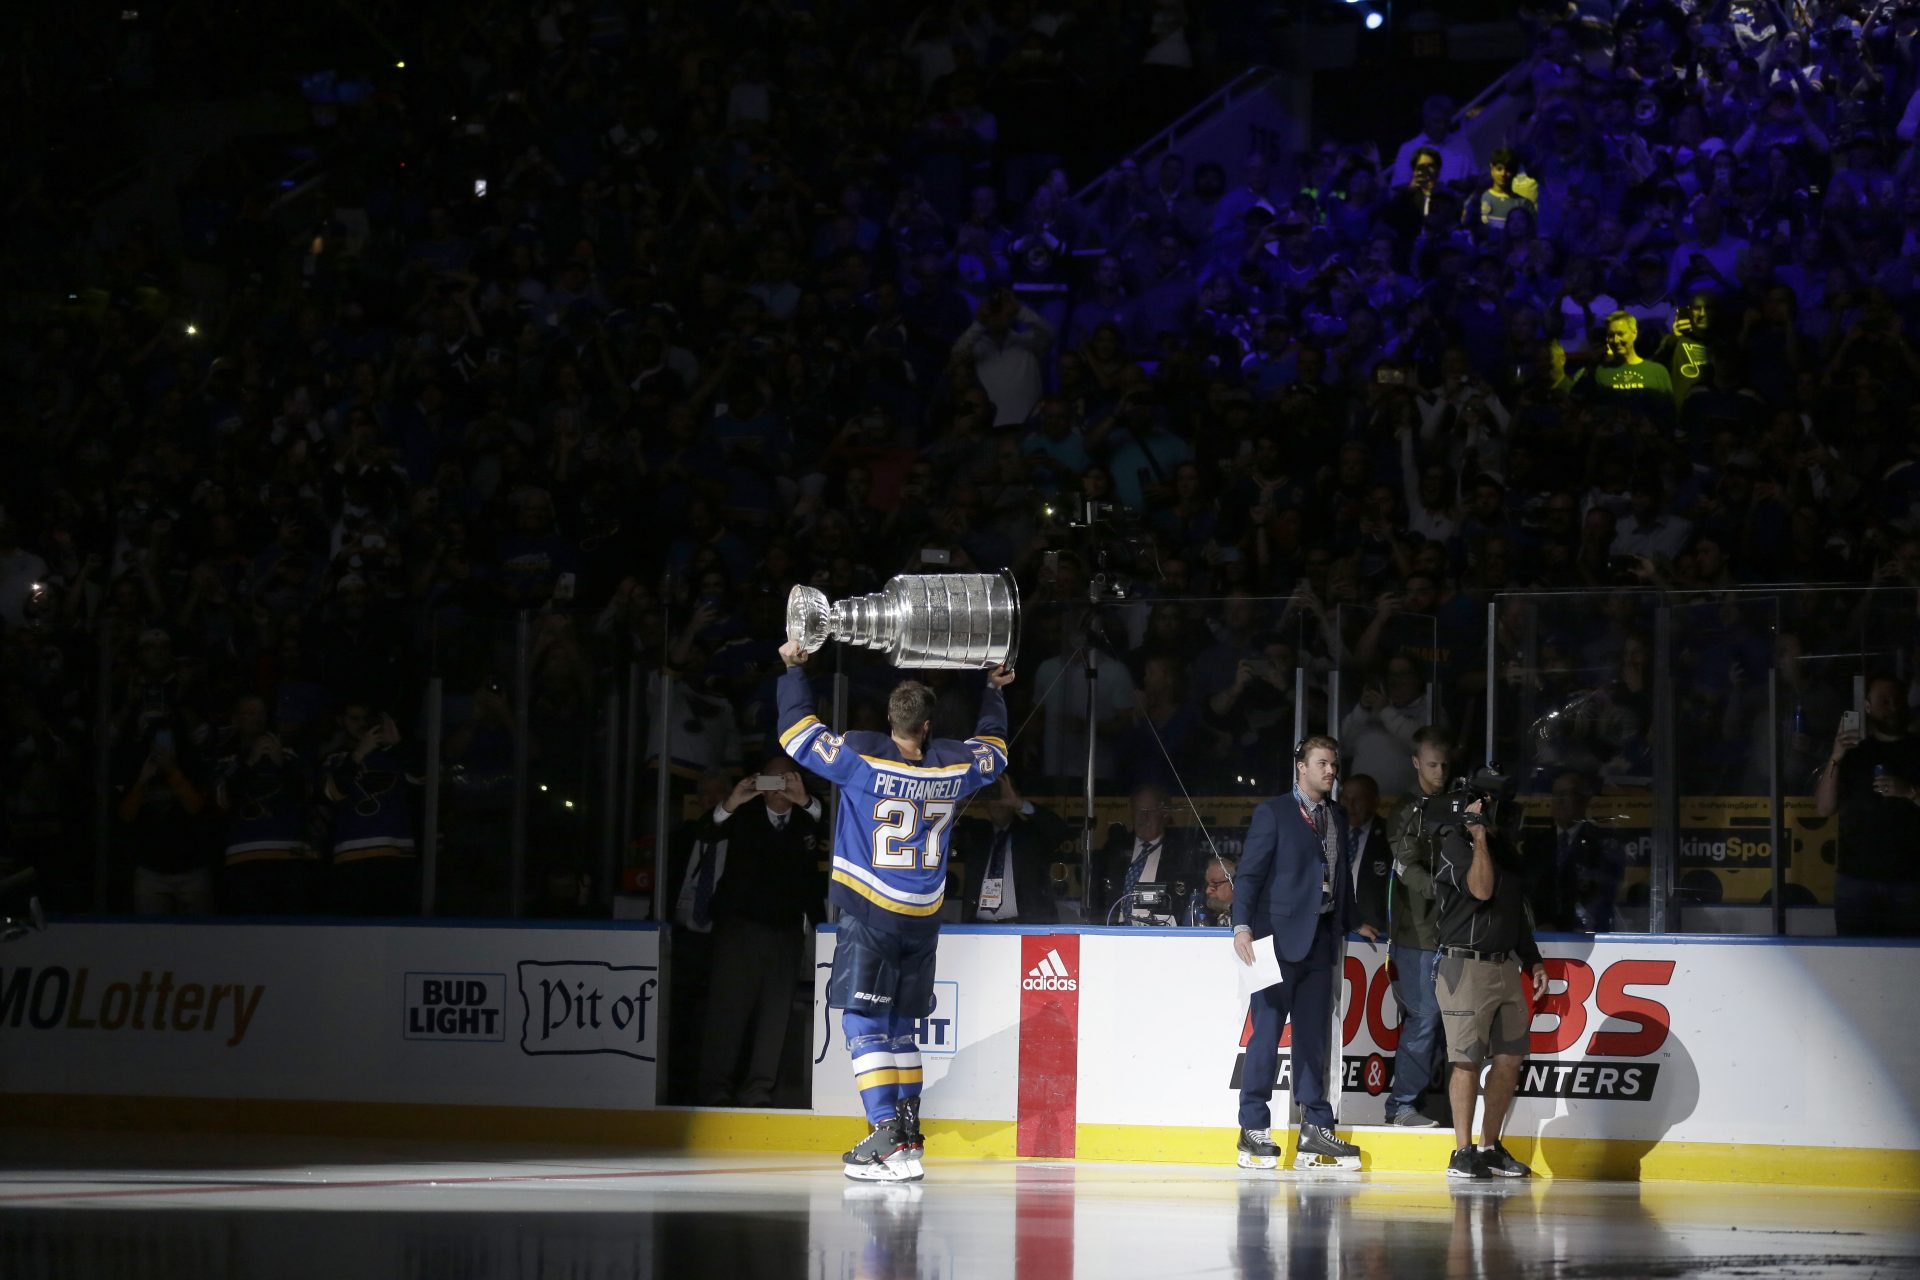 St. Louis Blues captain Alex Pietrangelo lifts the Stanley Cup during a ceremony honoring the Blues championship victory before the start of an NHL hockey game against the Washington Capitals Wednesday, Oct. 2, 2019, in St. Louis. The Blues defeated the Boston Bruins last season to win the Stanley Cup.